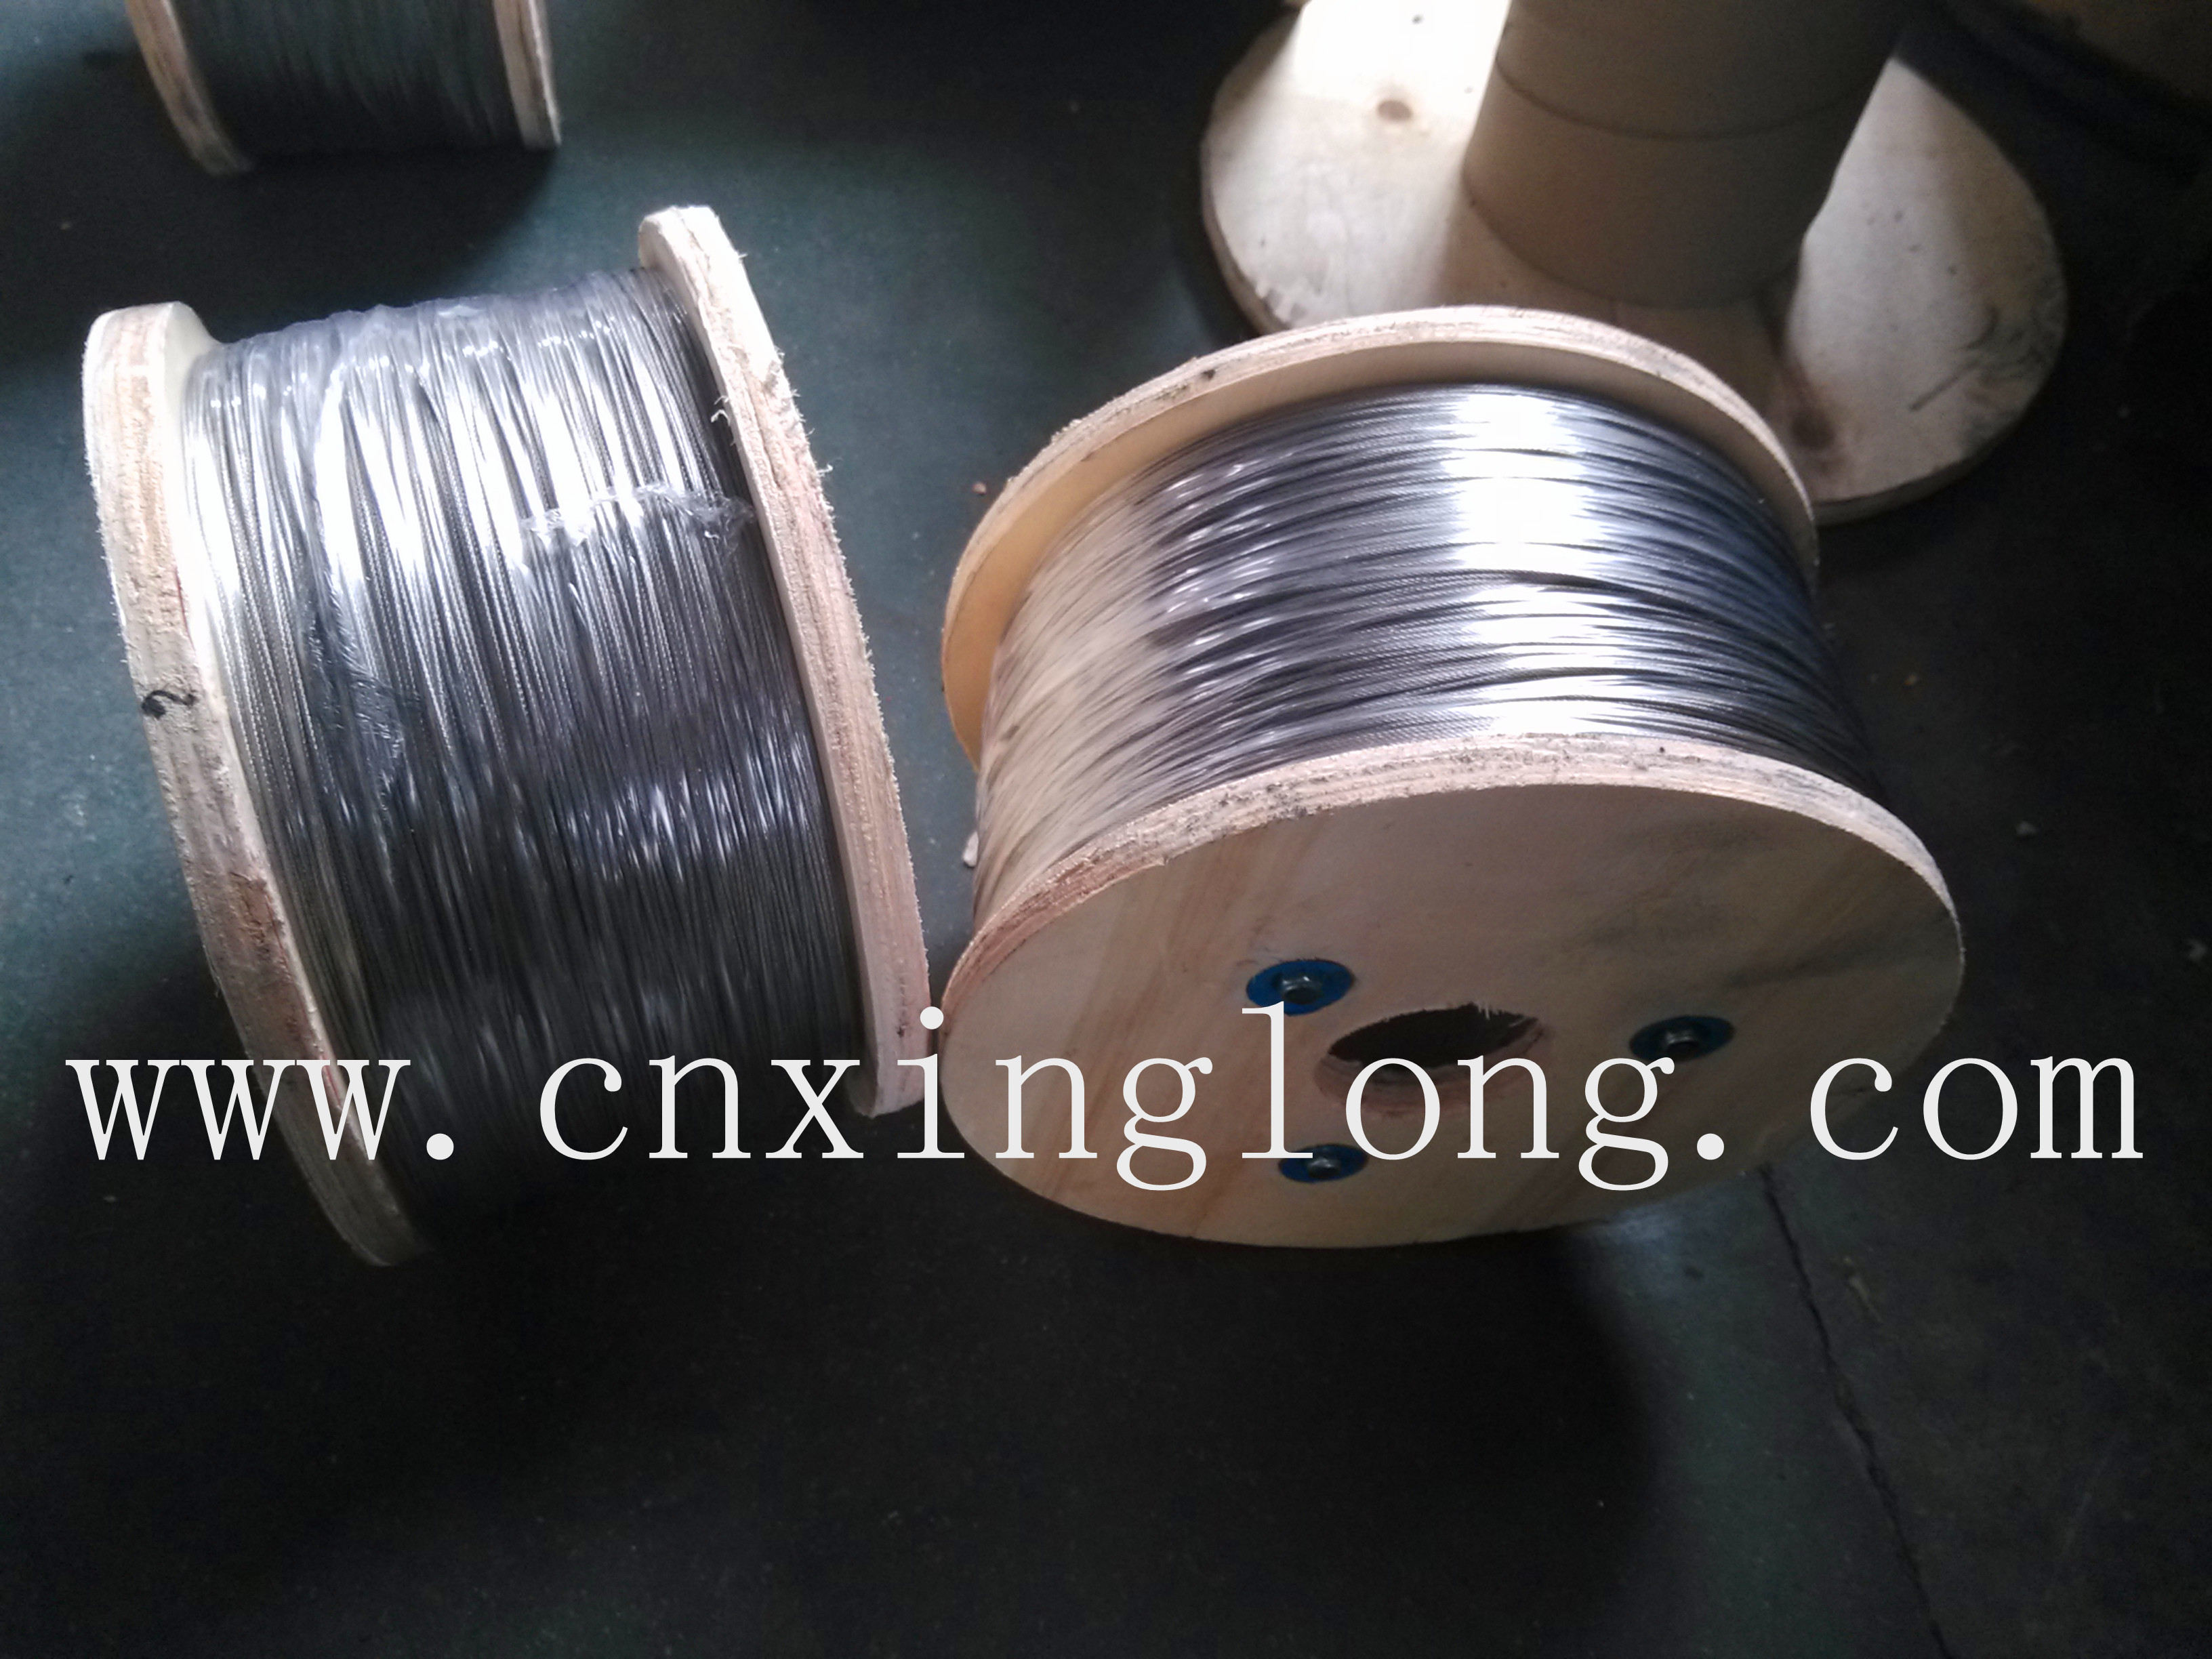 Quality sell xinglong coated wire rope 1x7 1x19 7x7 7x19 -stainless steel/galvanized wholesale